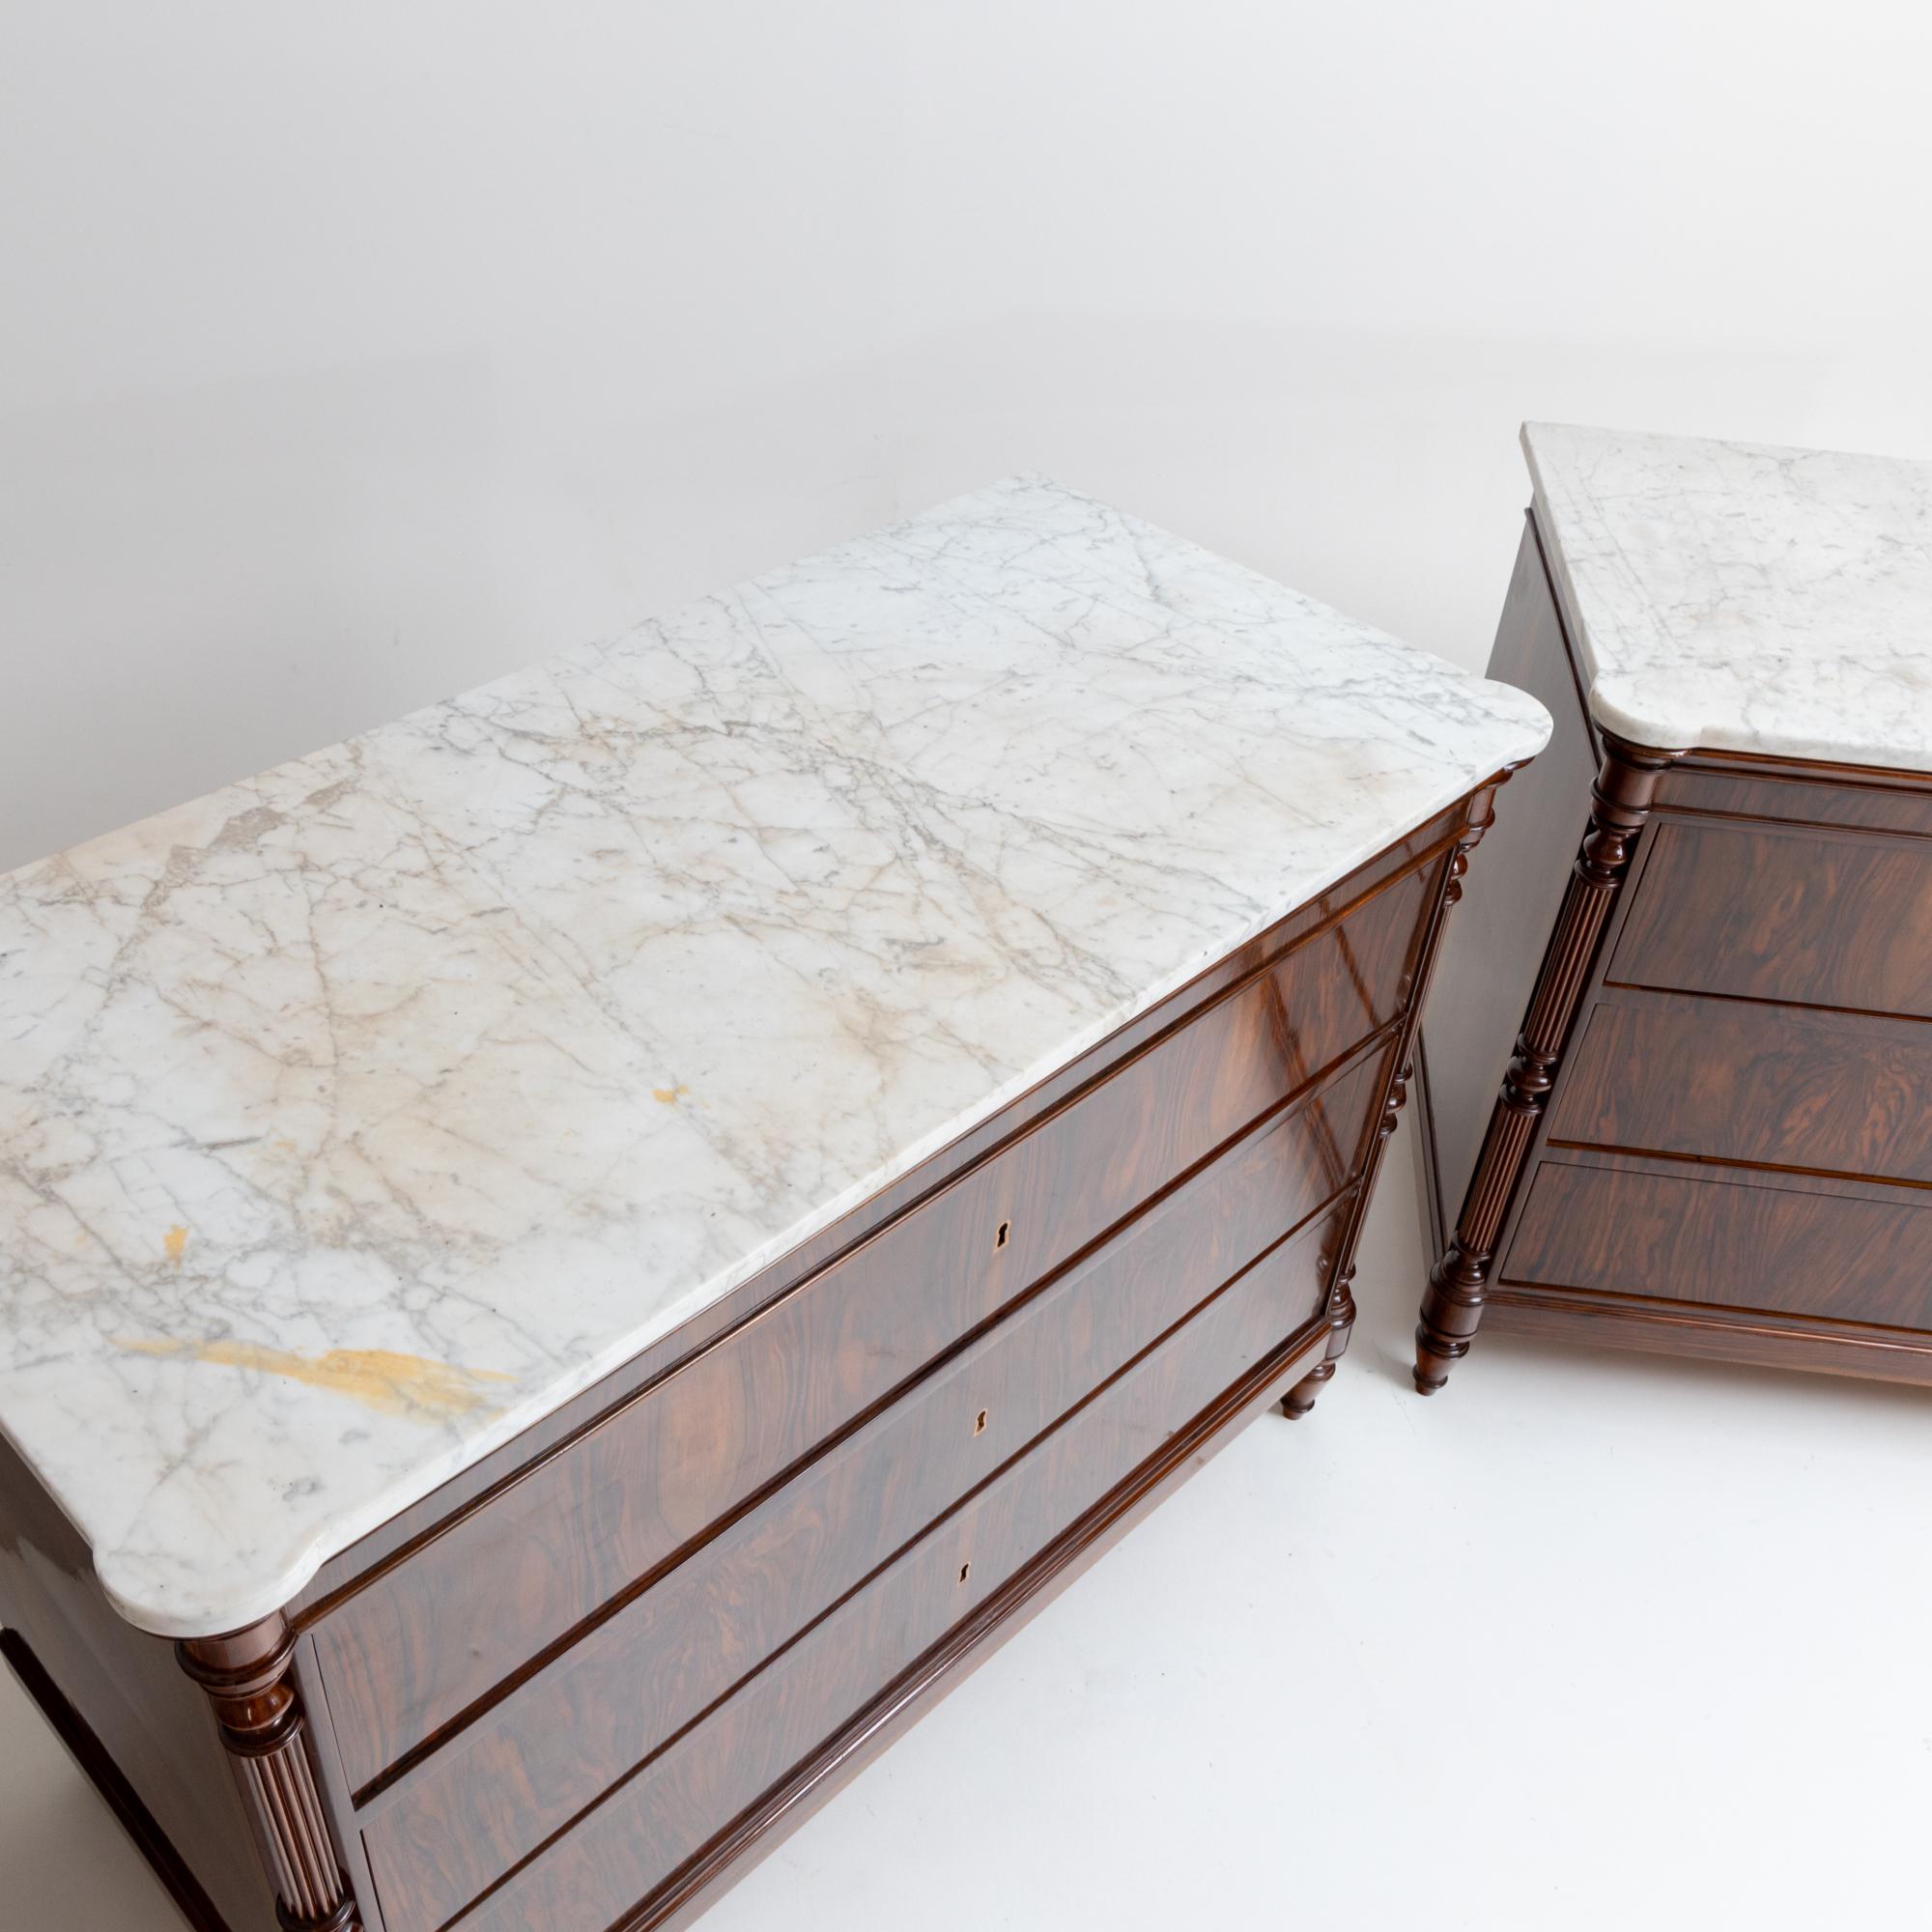 Pair of Chests of Drawers with Marble Tops, Mid-19th Century For Sale 3